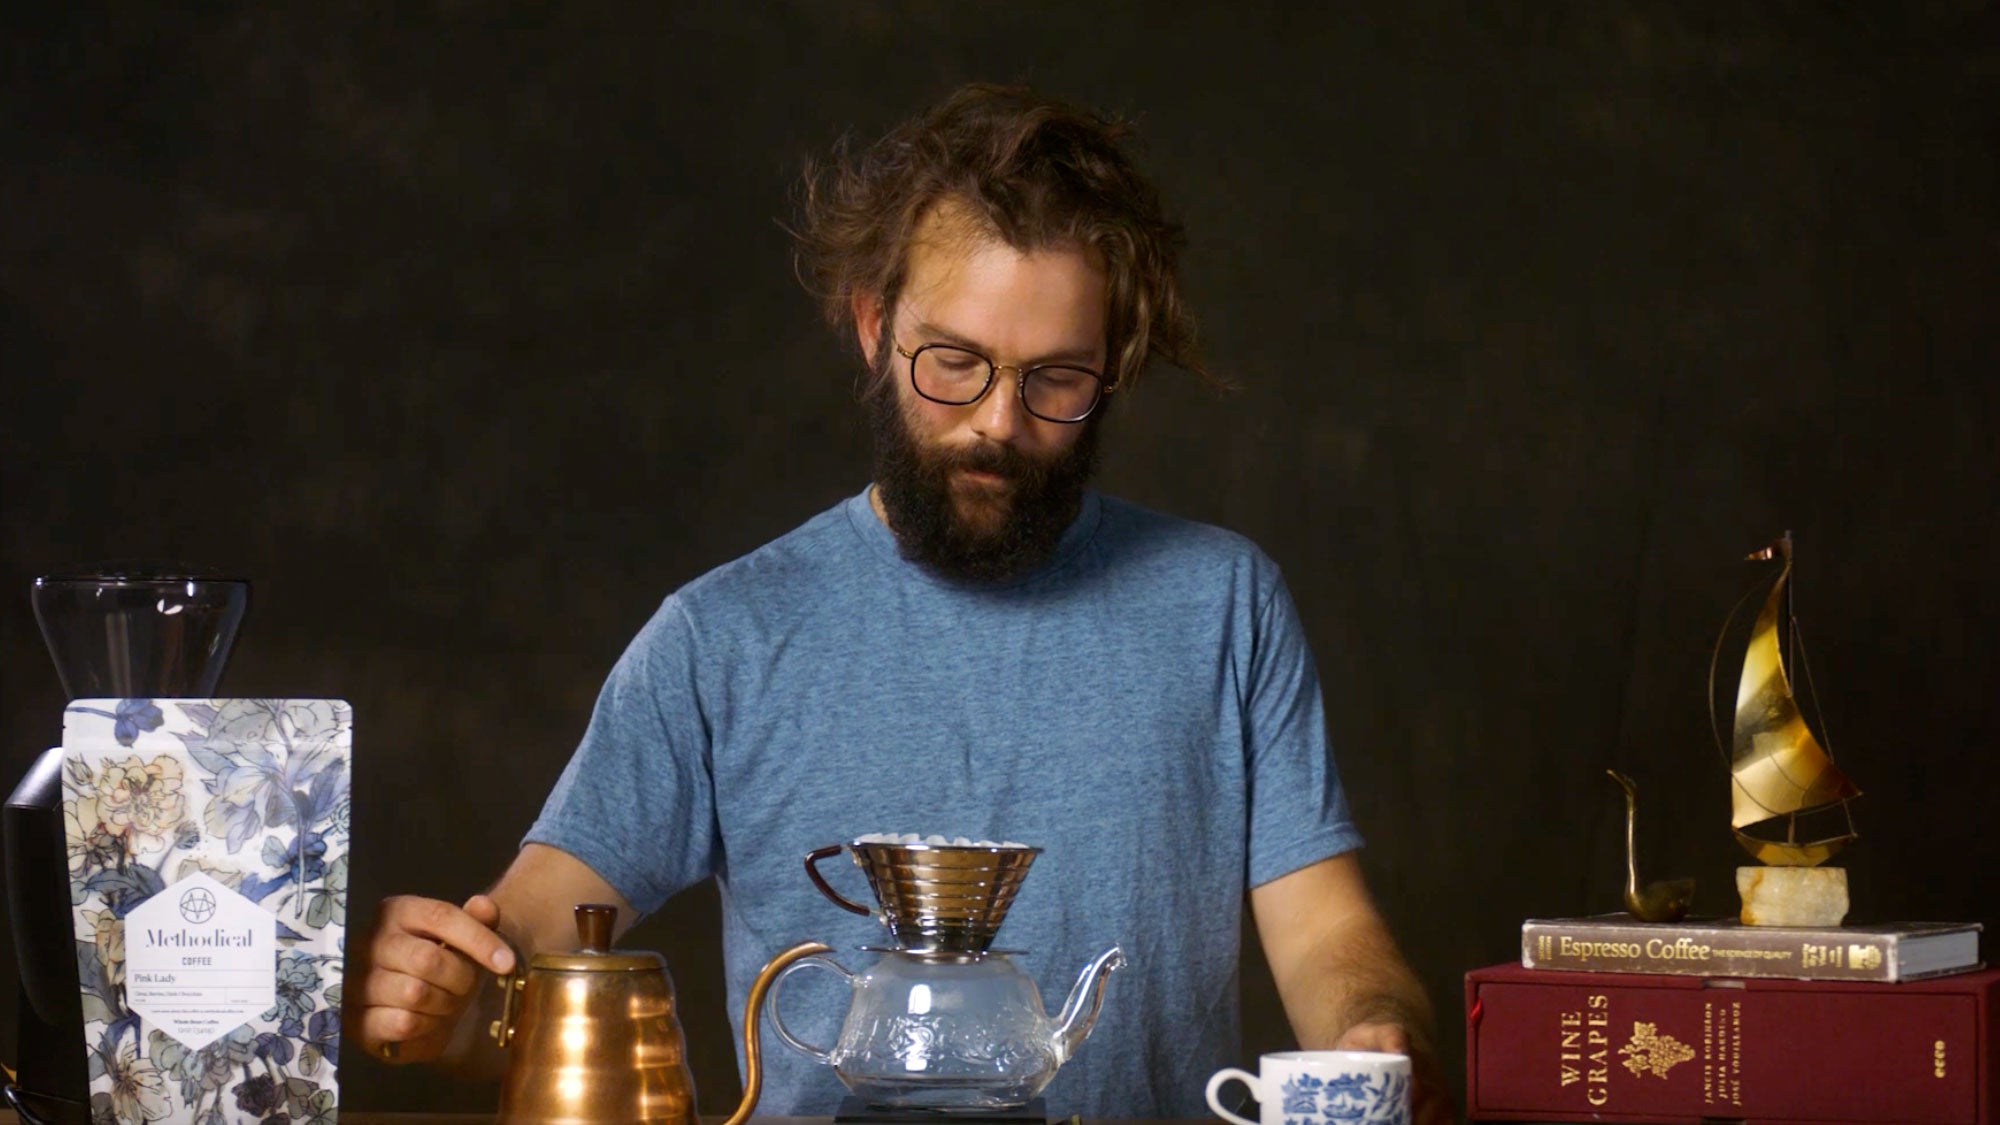 Pour Over Coffee Gear - How to Make the Best Pour Over Coffee